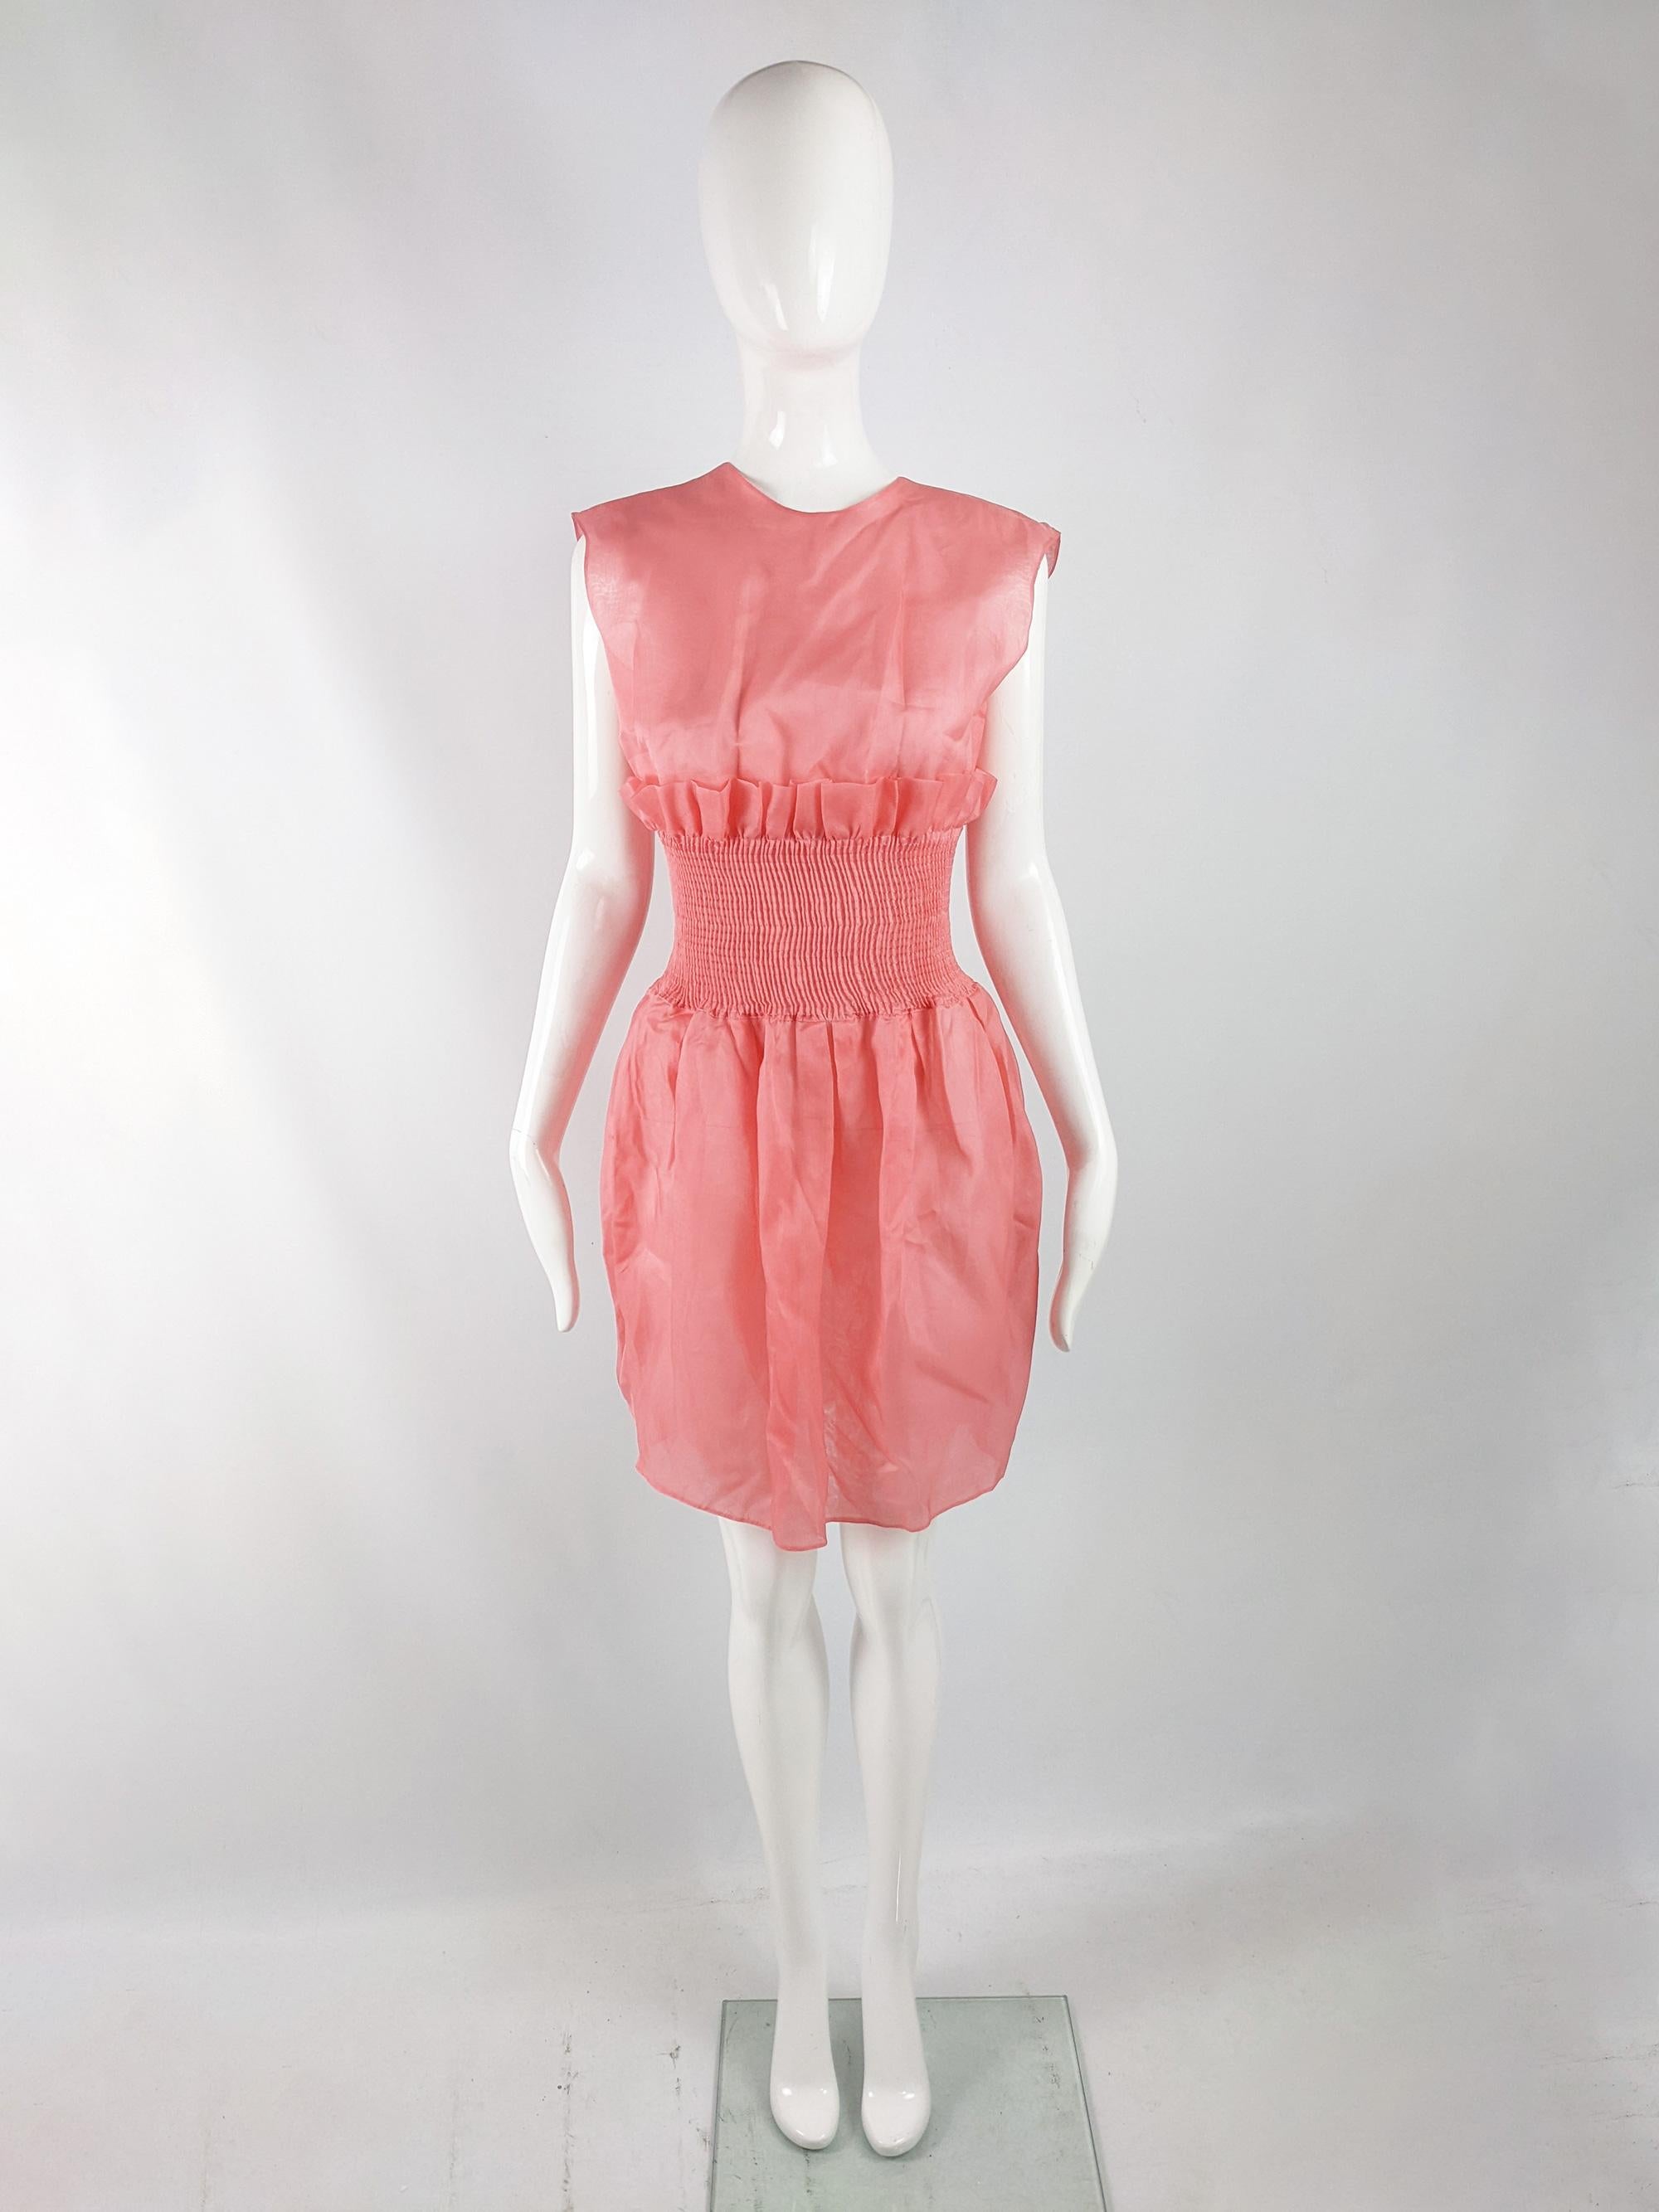 A stunning and rare vintage womens party dress by luxury Italian fashion designer Giorgio Armani for his Emporio Armani line, from the late 80s (probably the spring 89 collection). In a fully sheer, coral pink silk organza with a shirred waist that